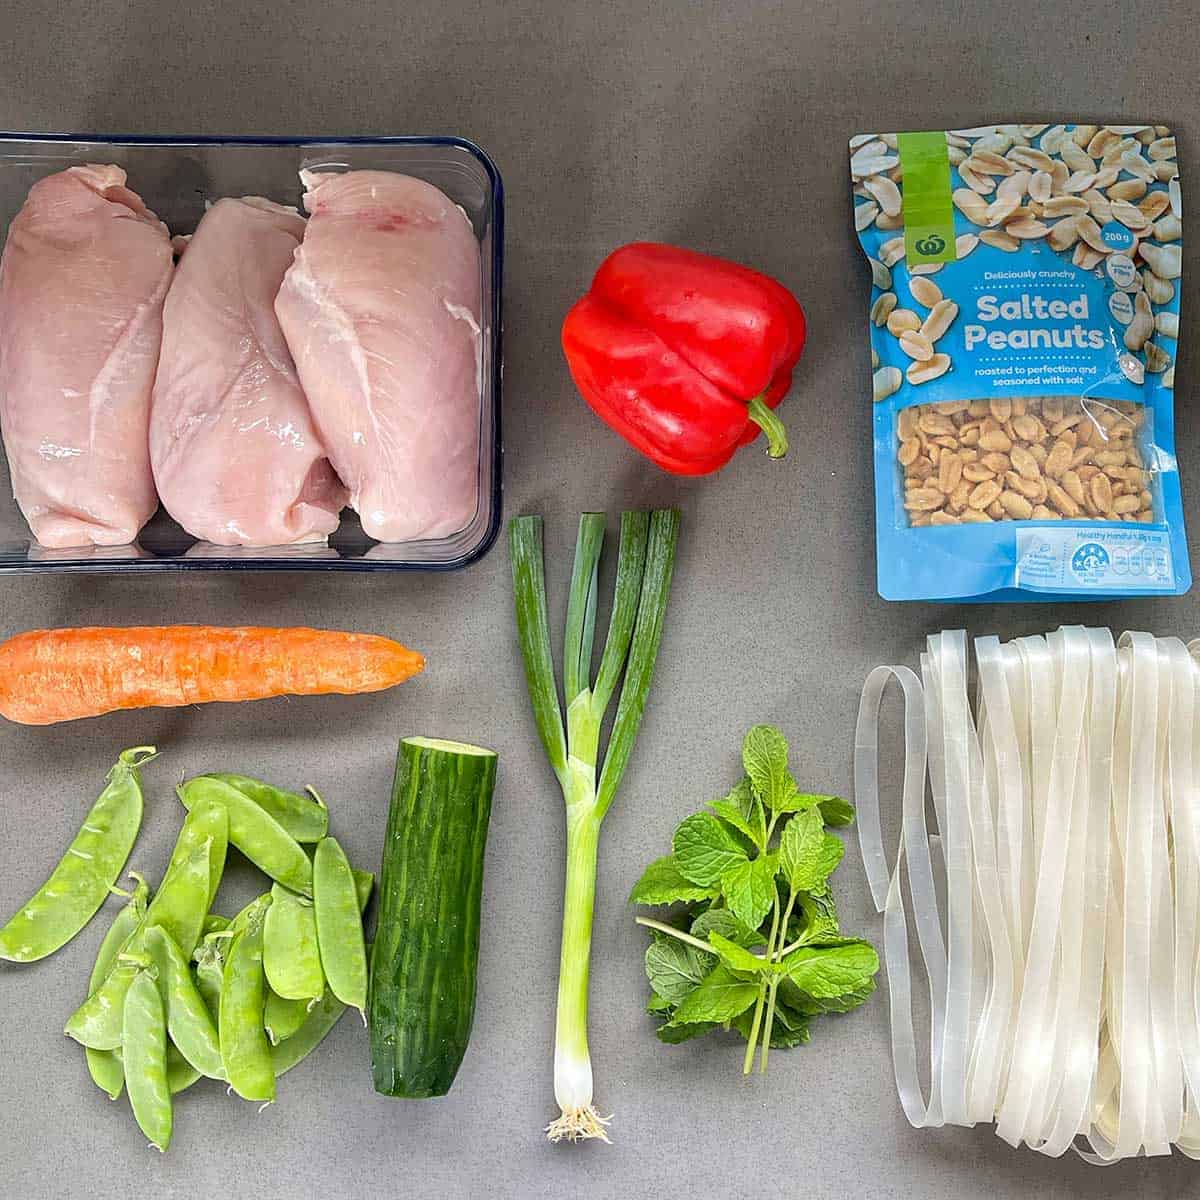 The ingredients for Thai Chicken Noodle Salad sitting on a grey bench.